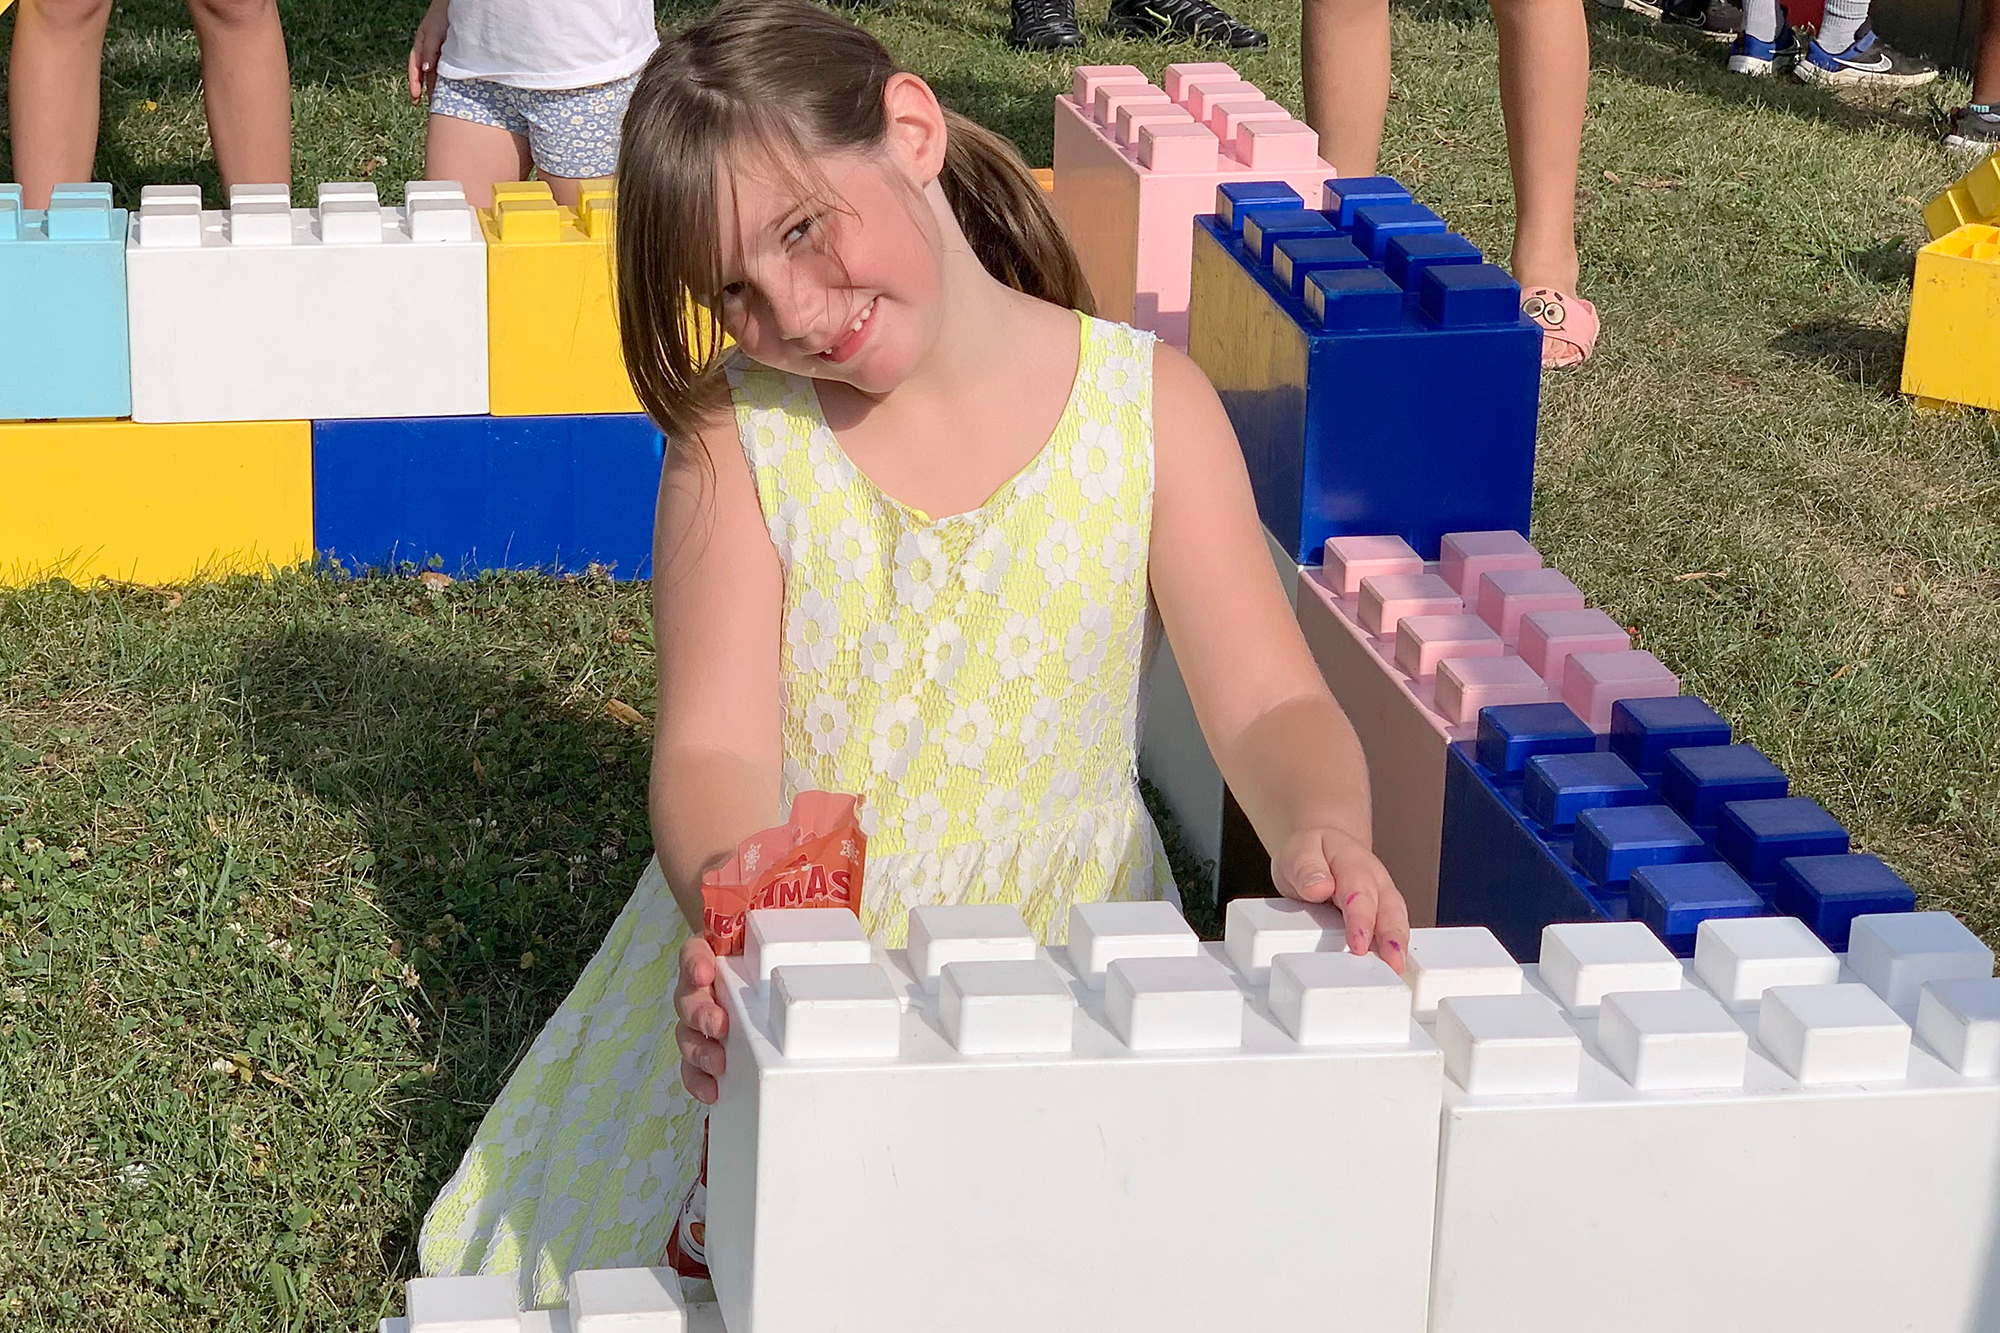 Navi Ridsdale took part in building a structure in the Creative Club Giant LEGO zone